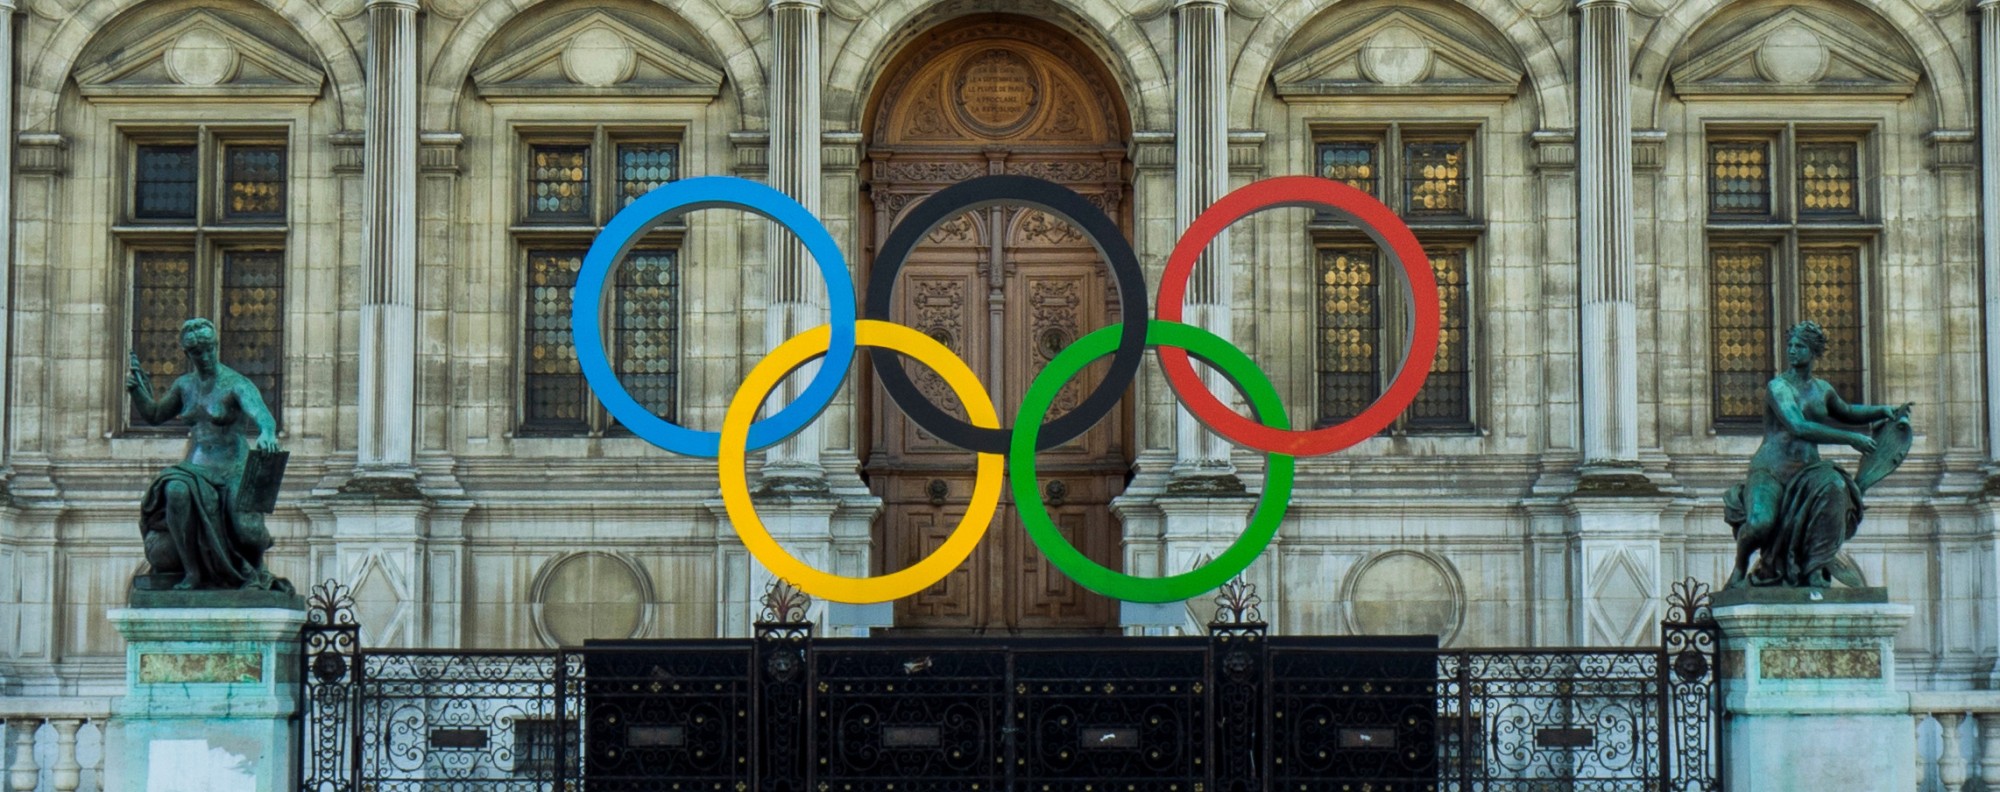  Olympic Games Rings are seen in front of the city hall in Paris. Photo: Shutterstock